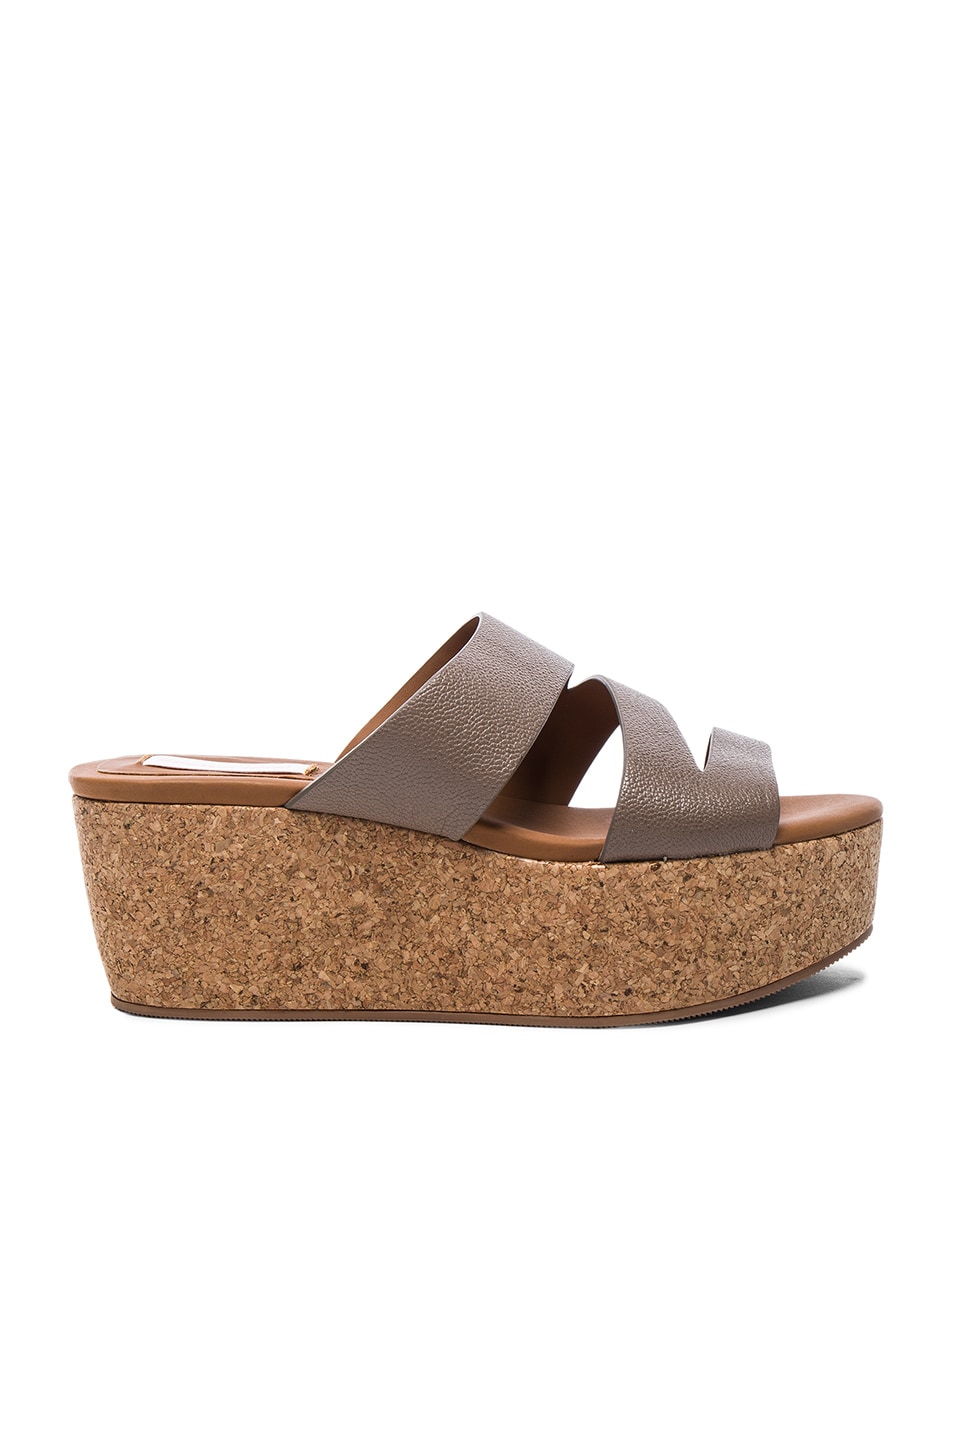 Image 1 of See By Chloe Leather Dania Wedge Sandals in Khaki